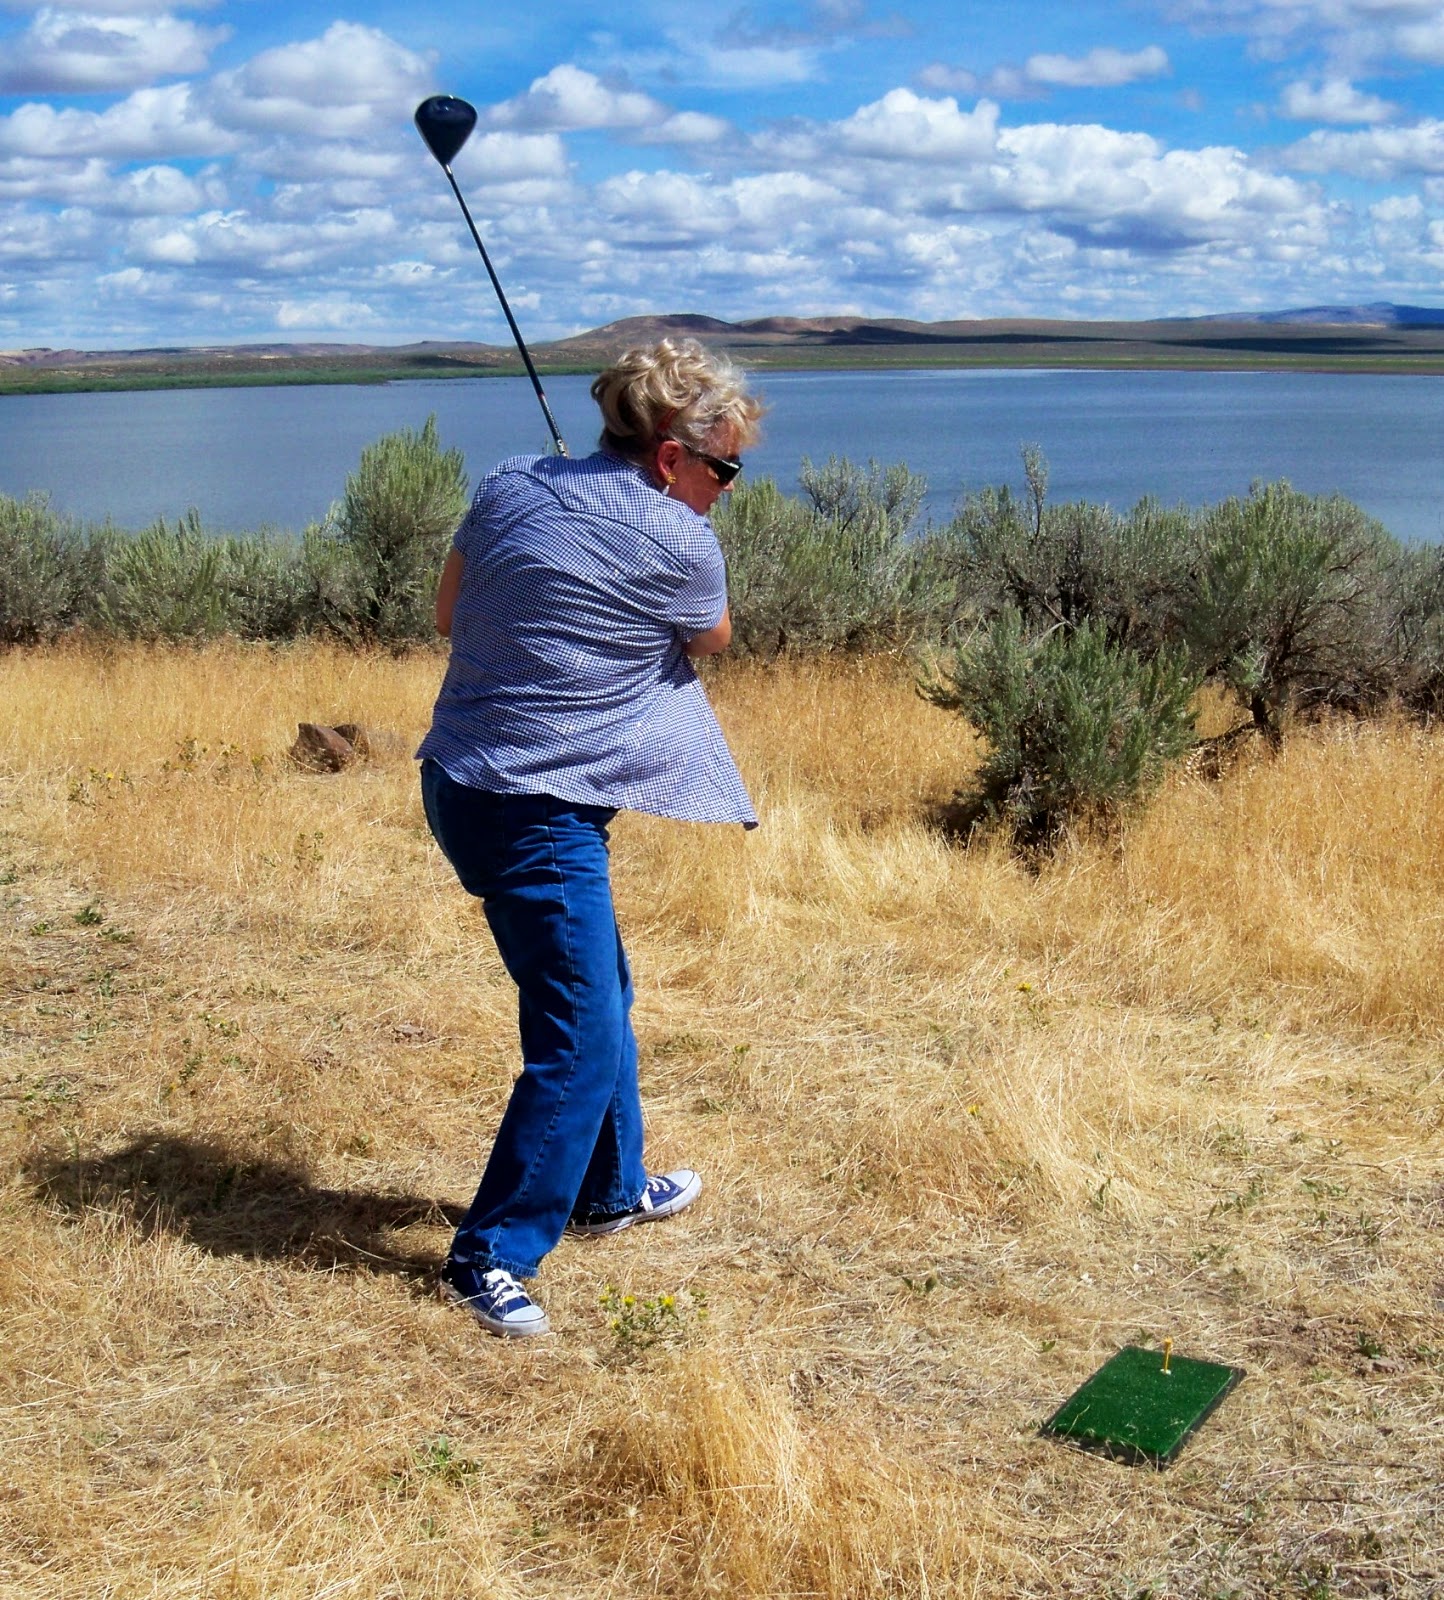 Golf swing by author Janet Chester Bly